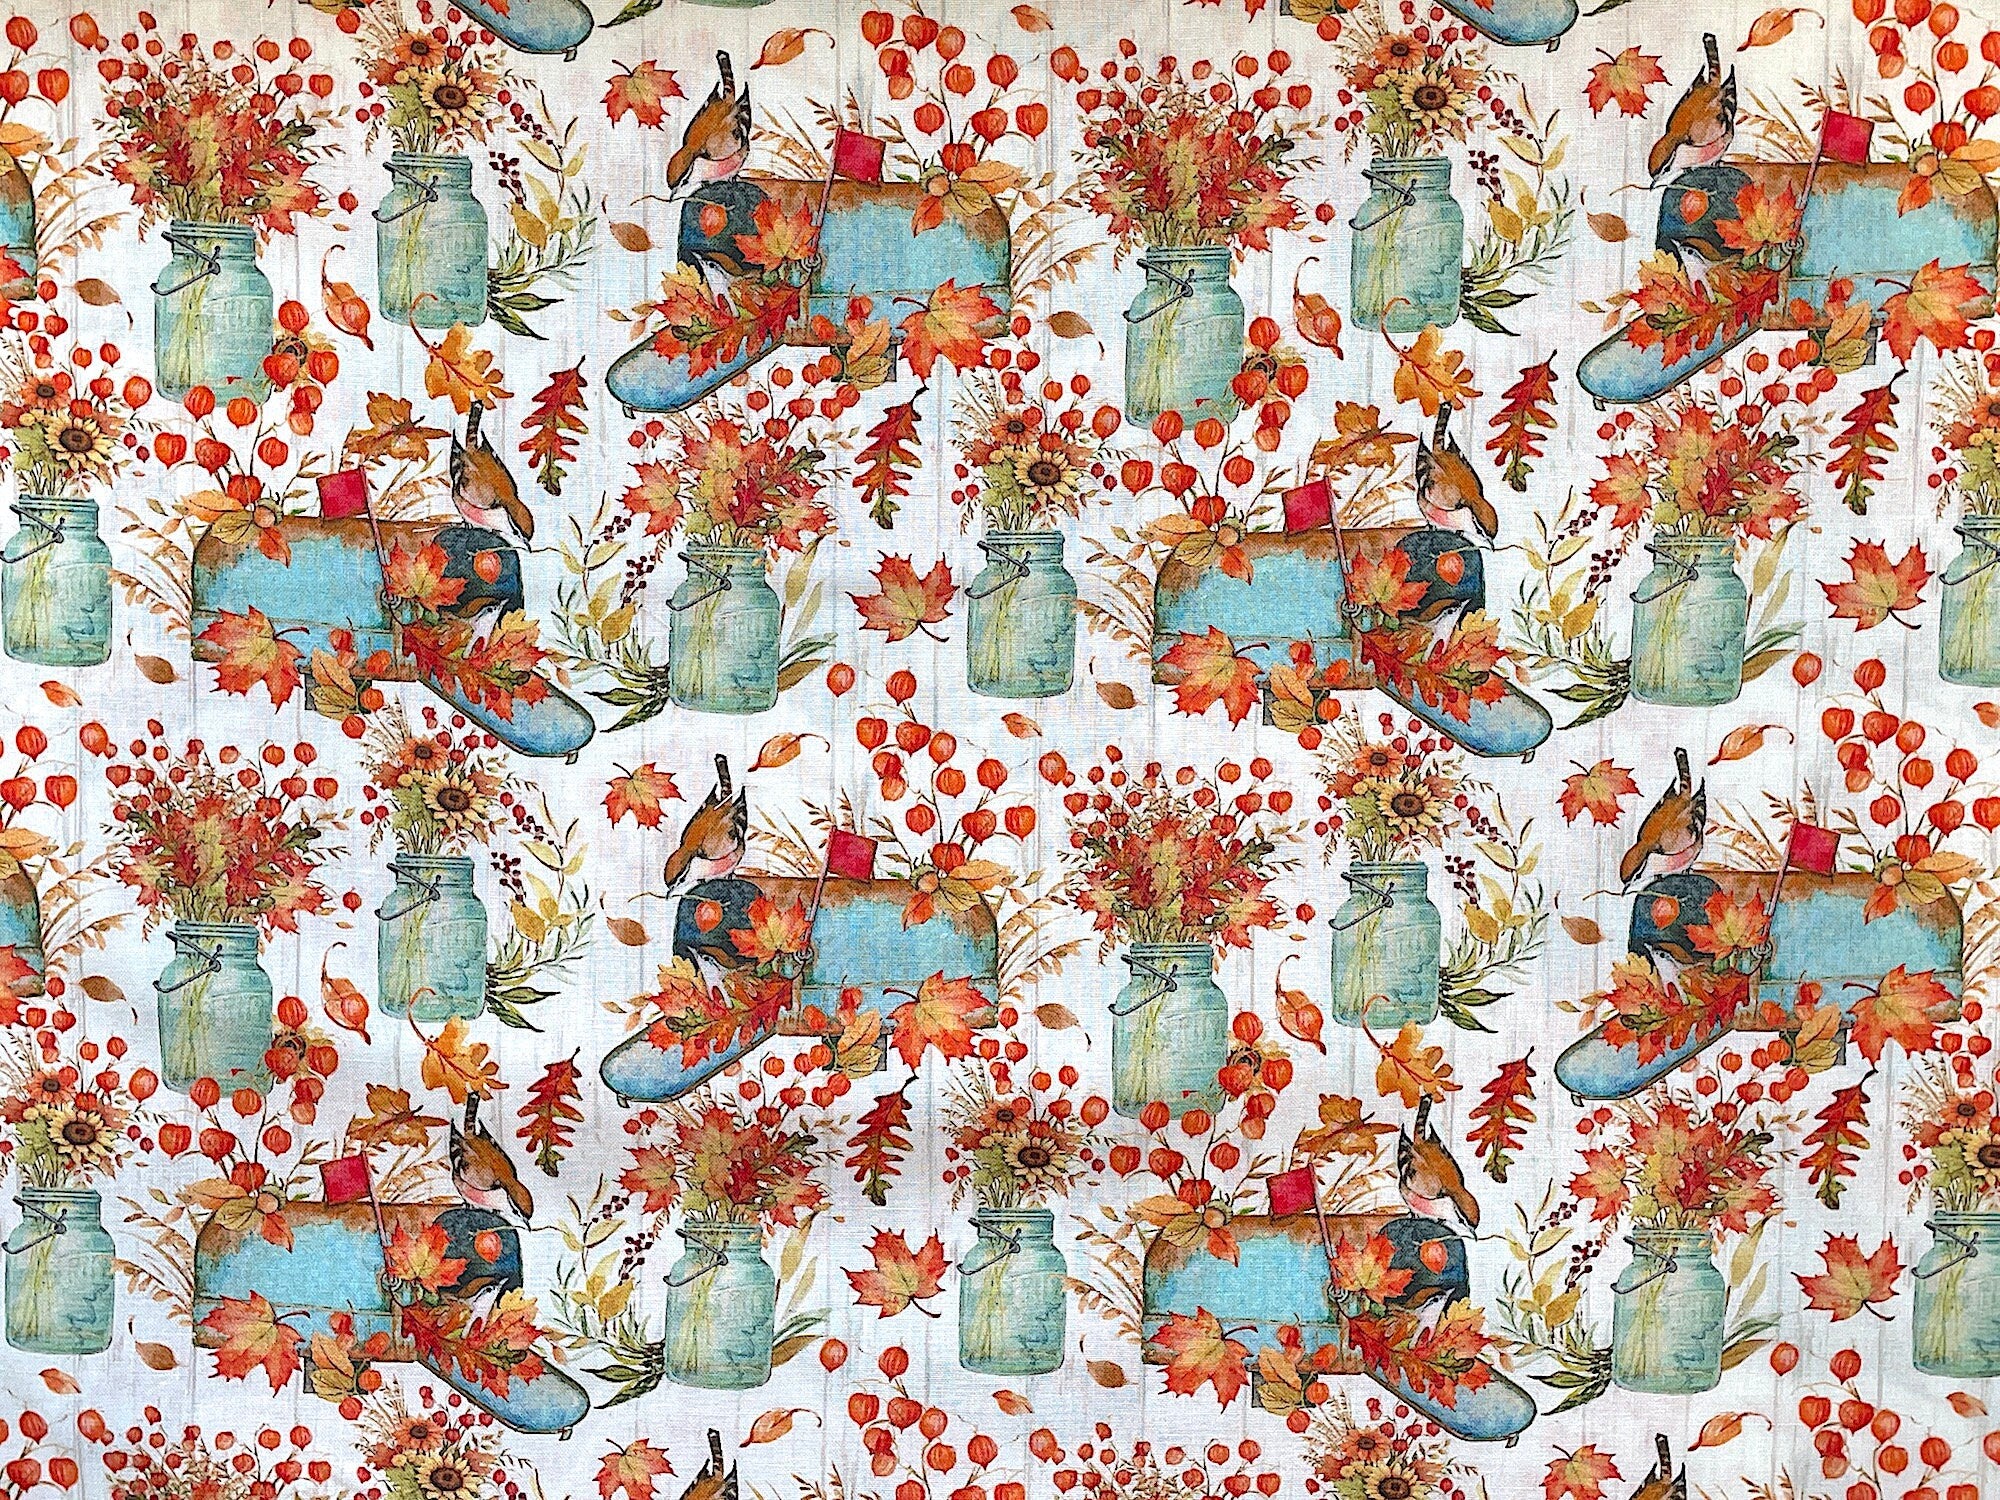 This fall themed fabric is covered with mailboxes which are surrounded by leaves. Some of the mailboxes have birds on them. There are also jars filled with fall flowers such as sunflowers.